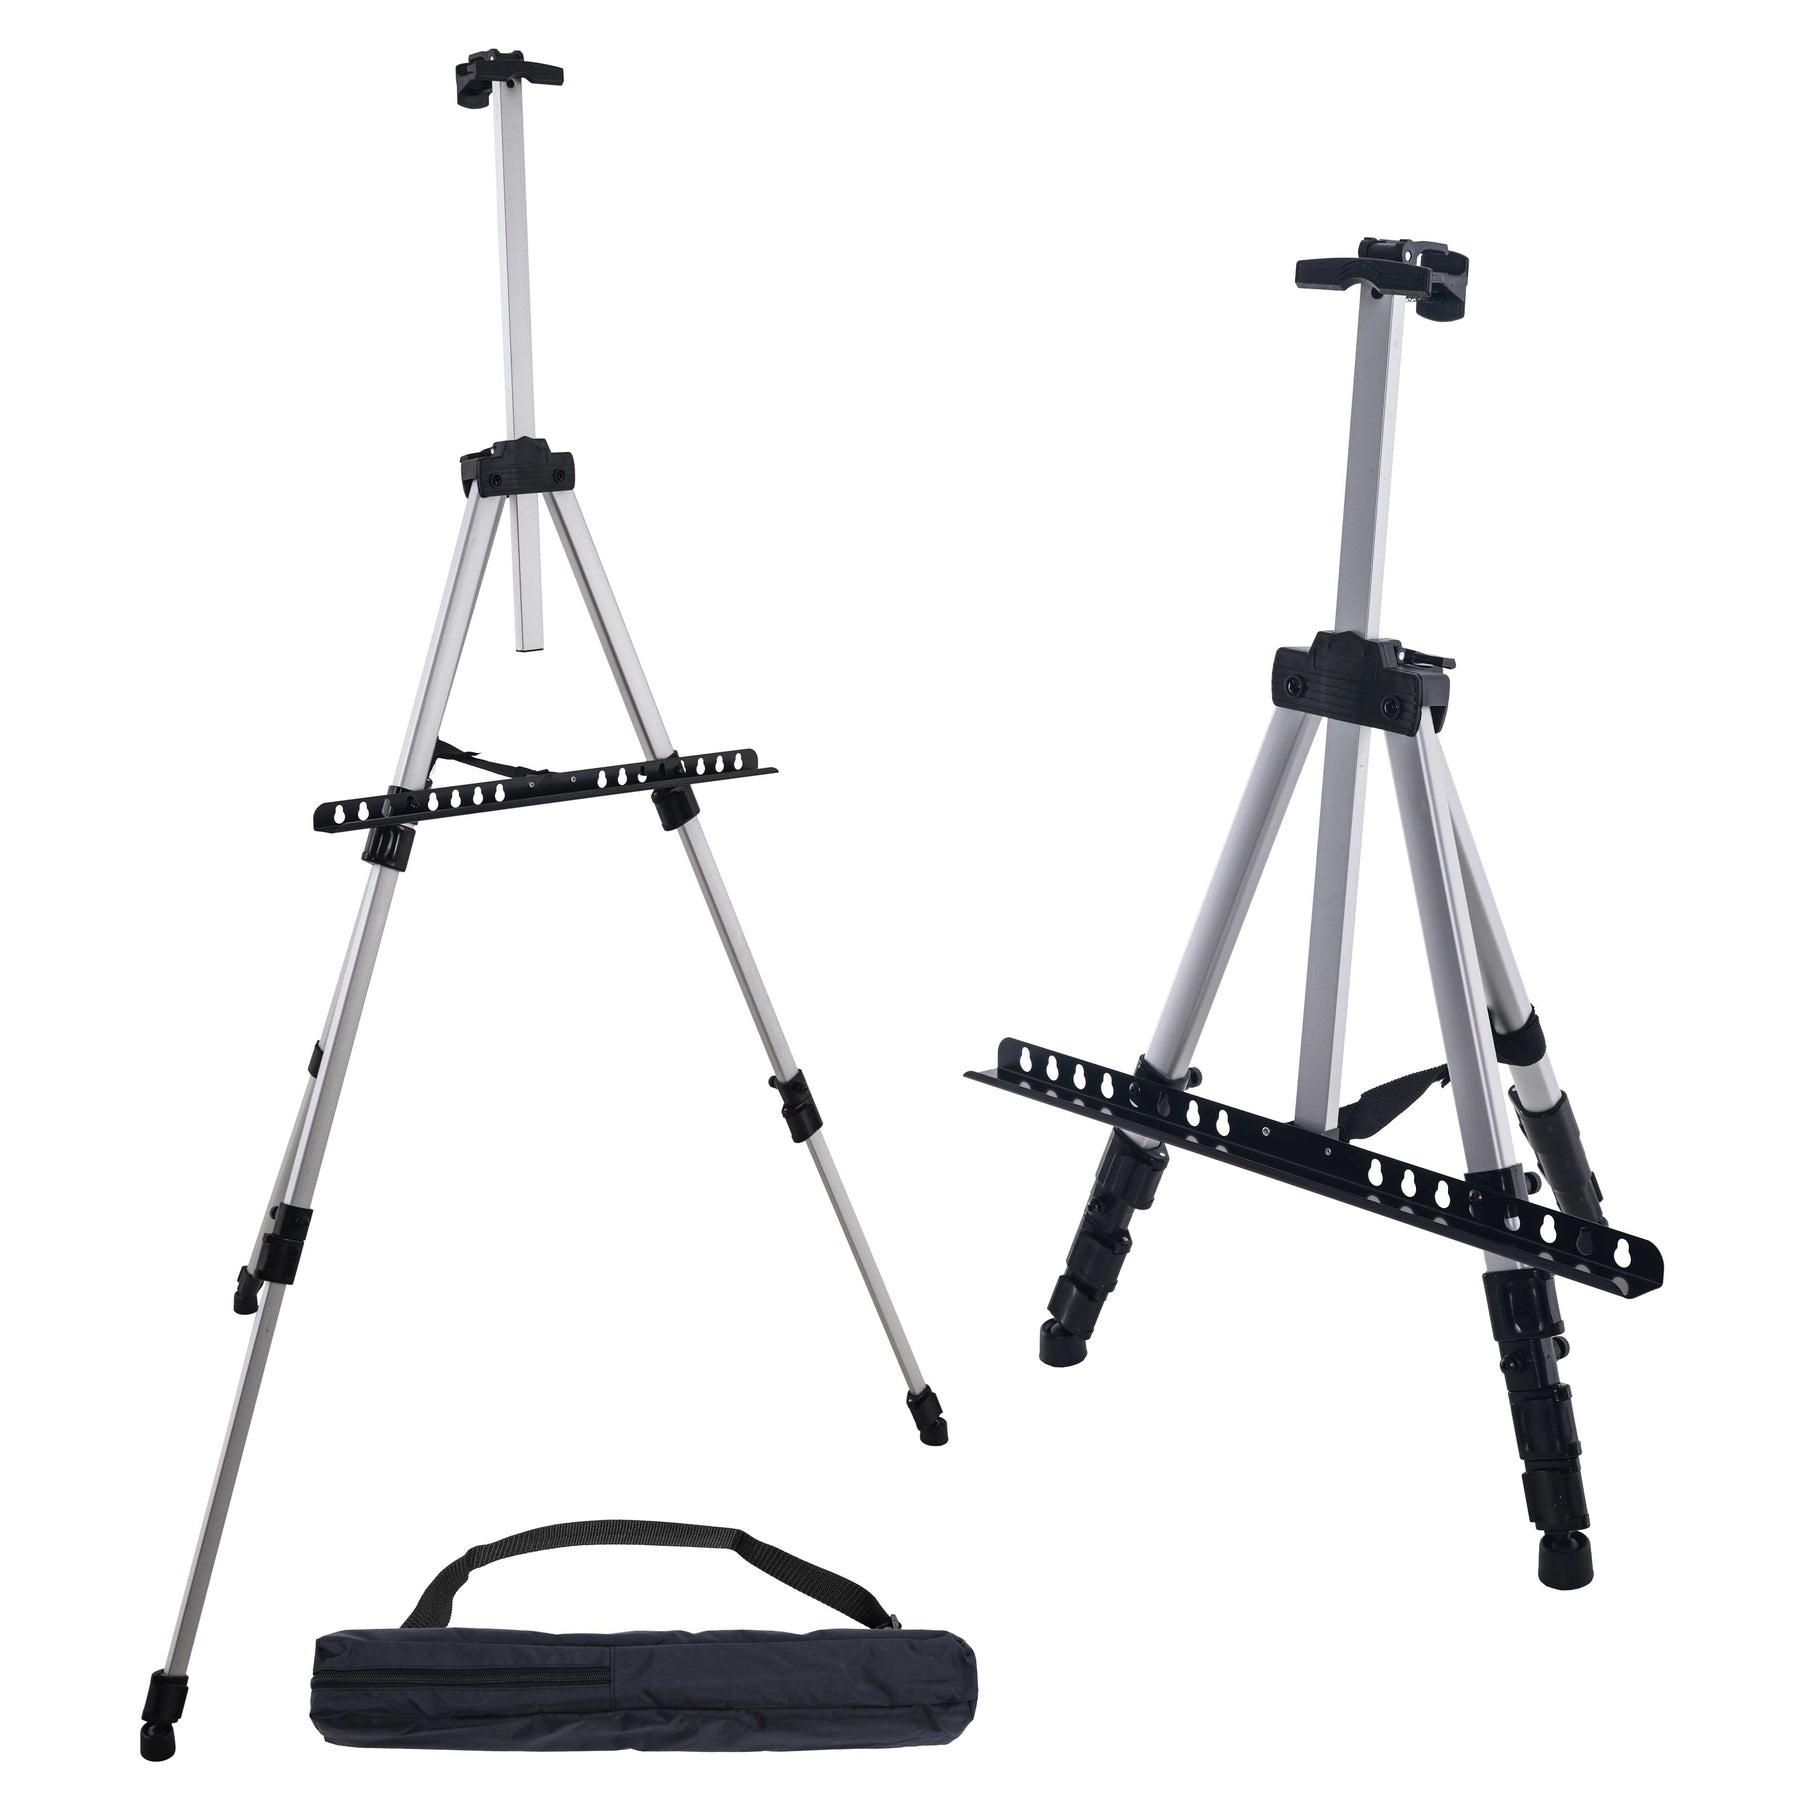 US Art Supply 66 High Showroom Black Aluminum Display Easel and  Presentation Stand - Large Adjustable Height Portable Tripod, Holds 25 lbs  - Floor